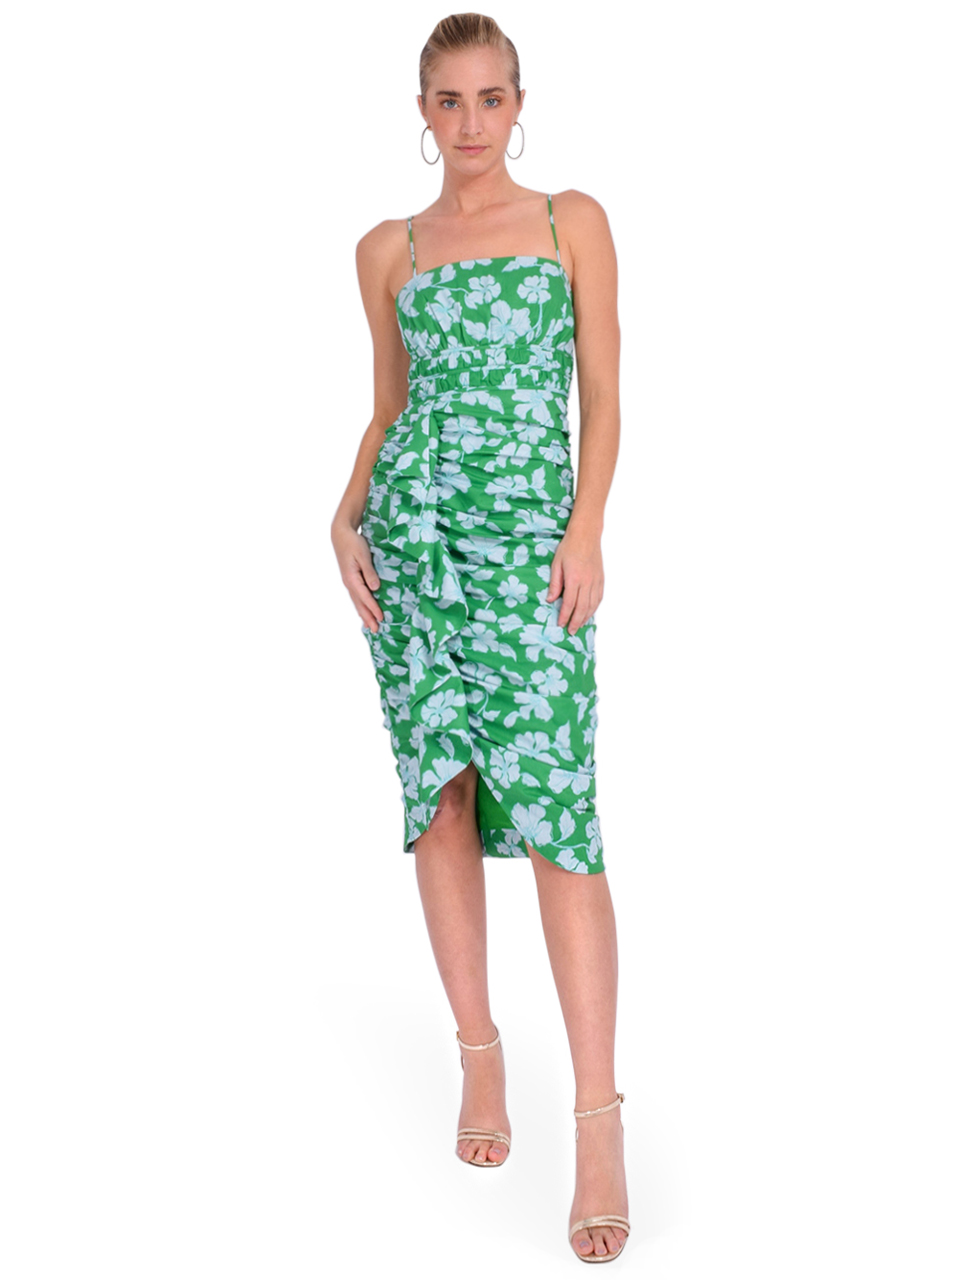 AMUR Olly Ruched Midi Dress in Green Frog Flower Front View 1

